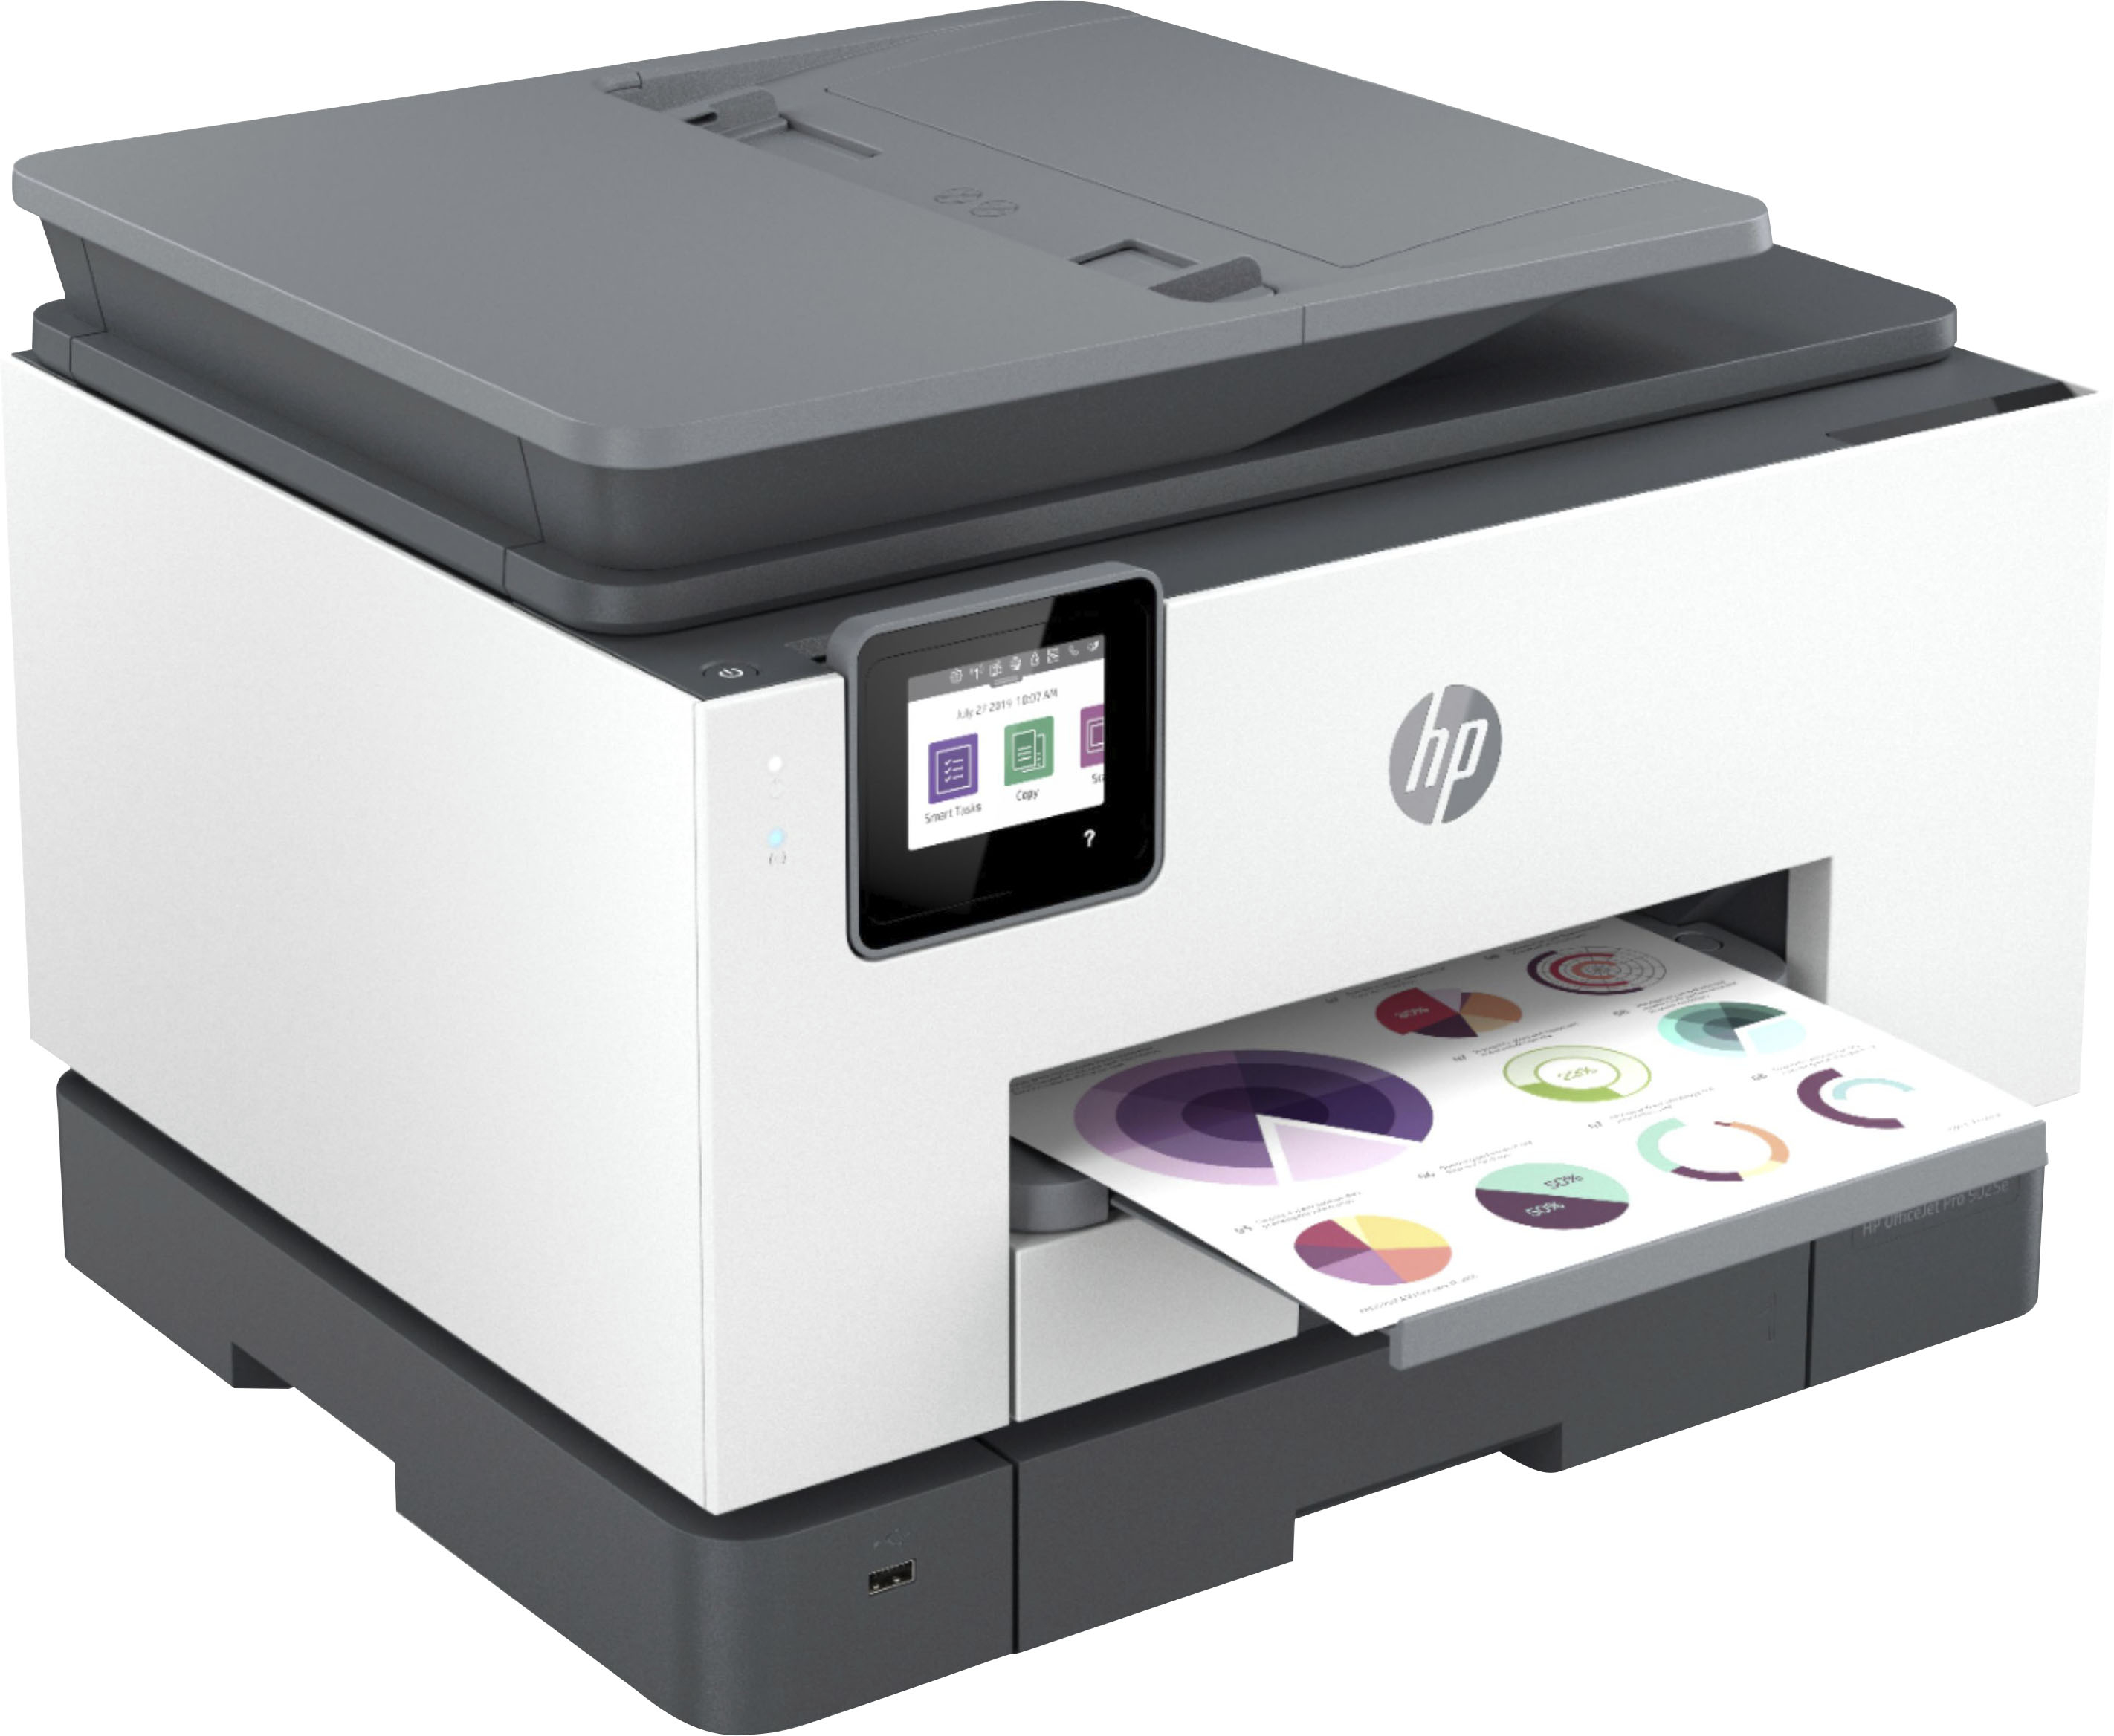 Monochrome Compact Laser All-in-One Printer with Duplex Printing and  Wireless Networking (Refurbished)